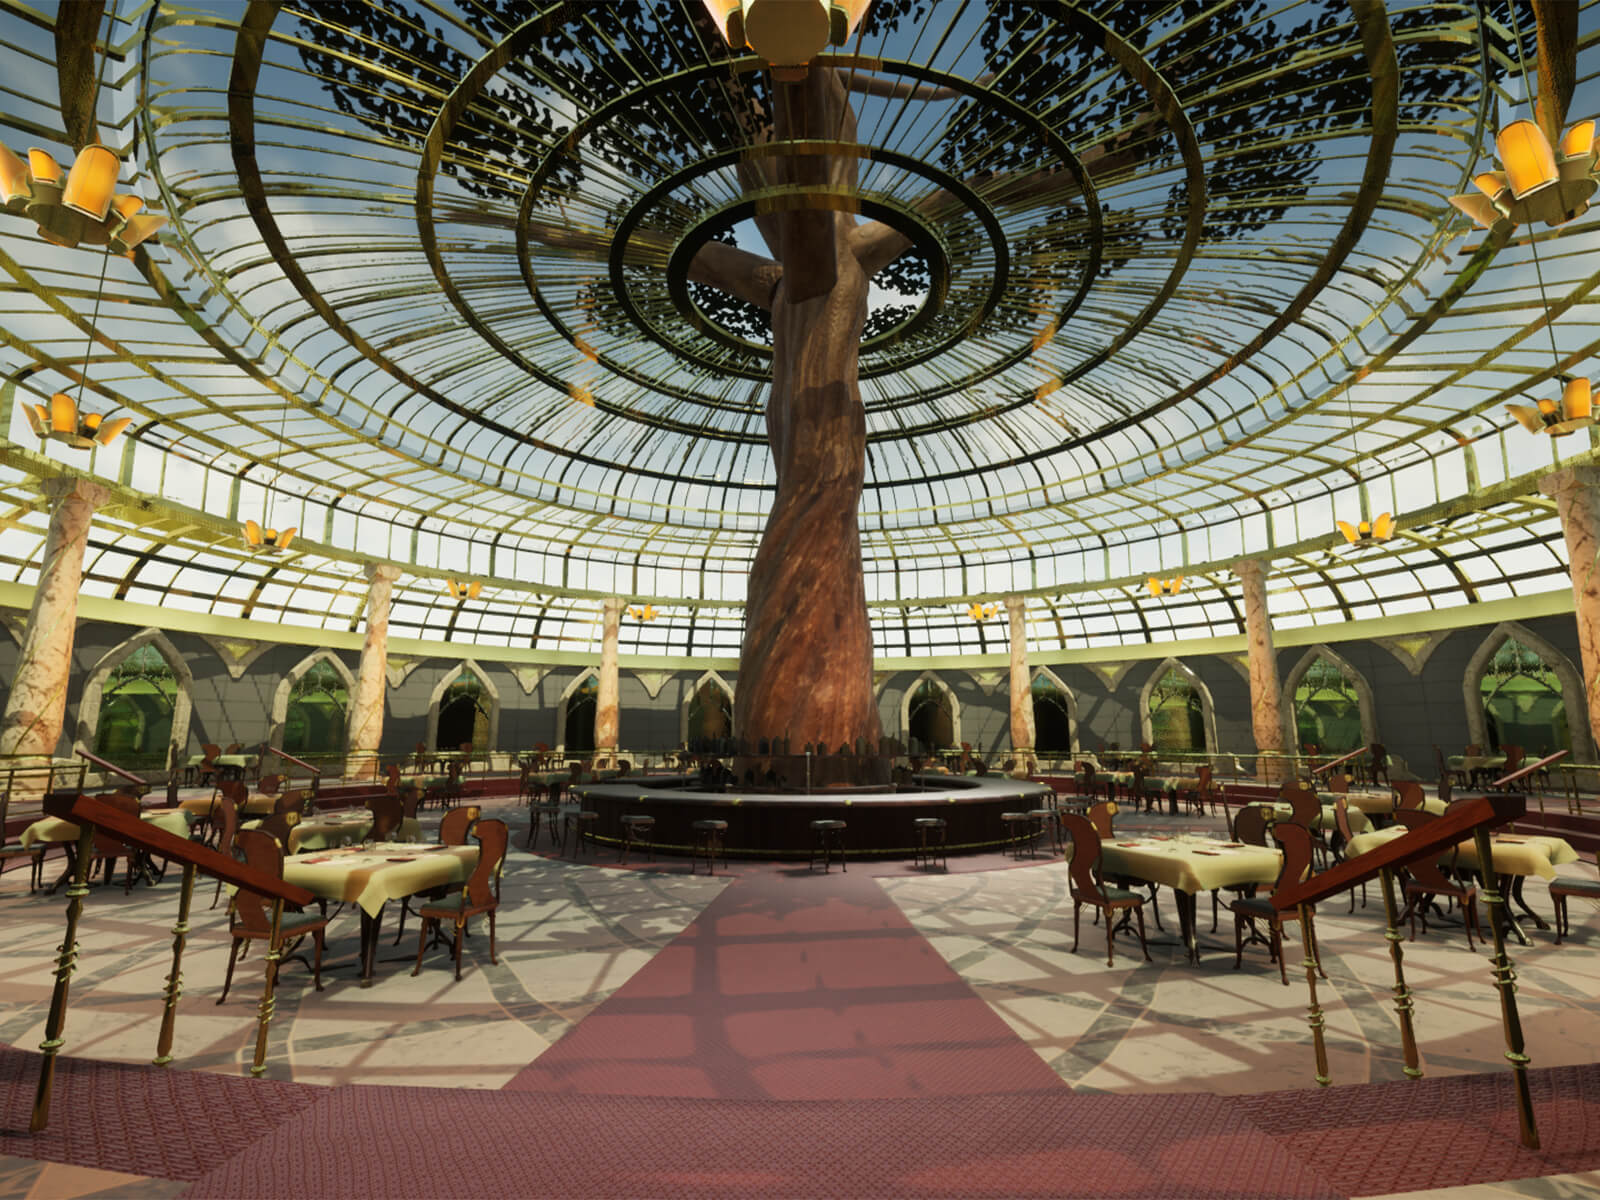 A large dining area with a tree growing through the glass roof